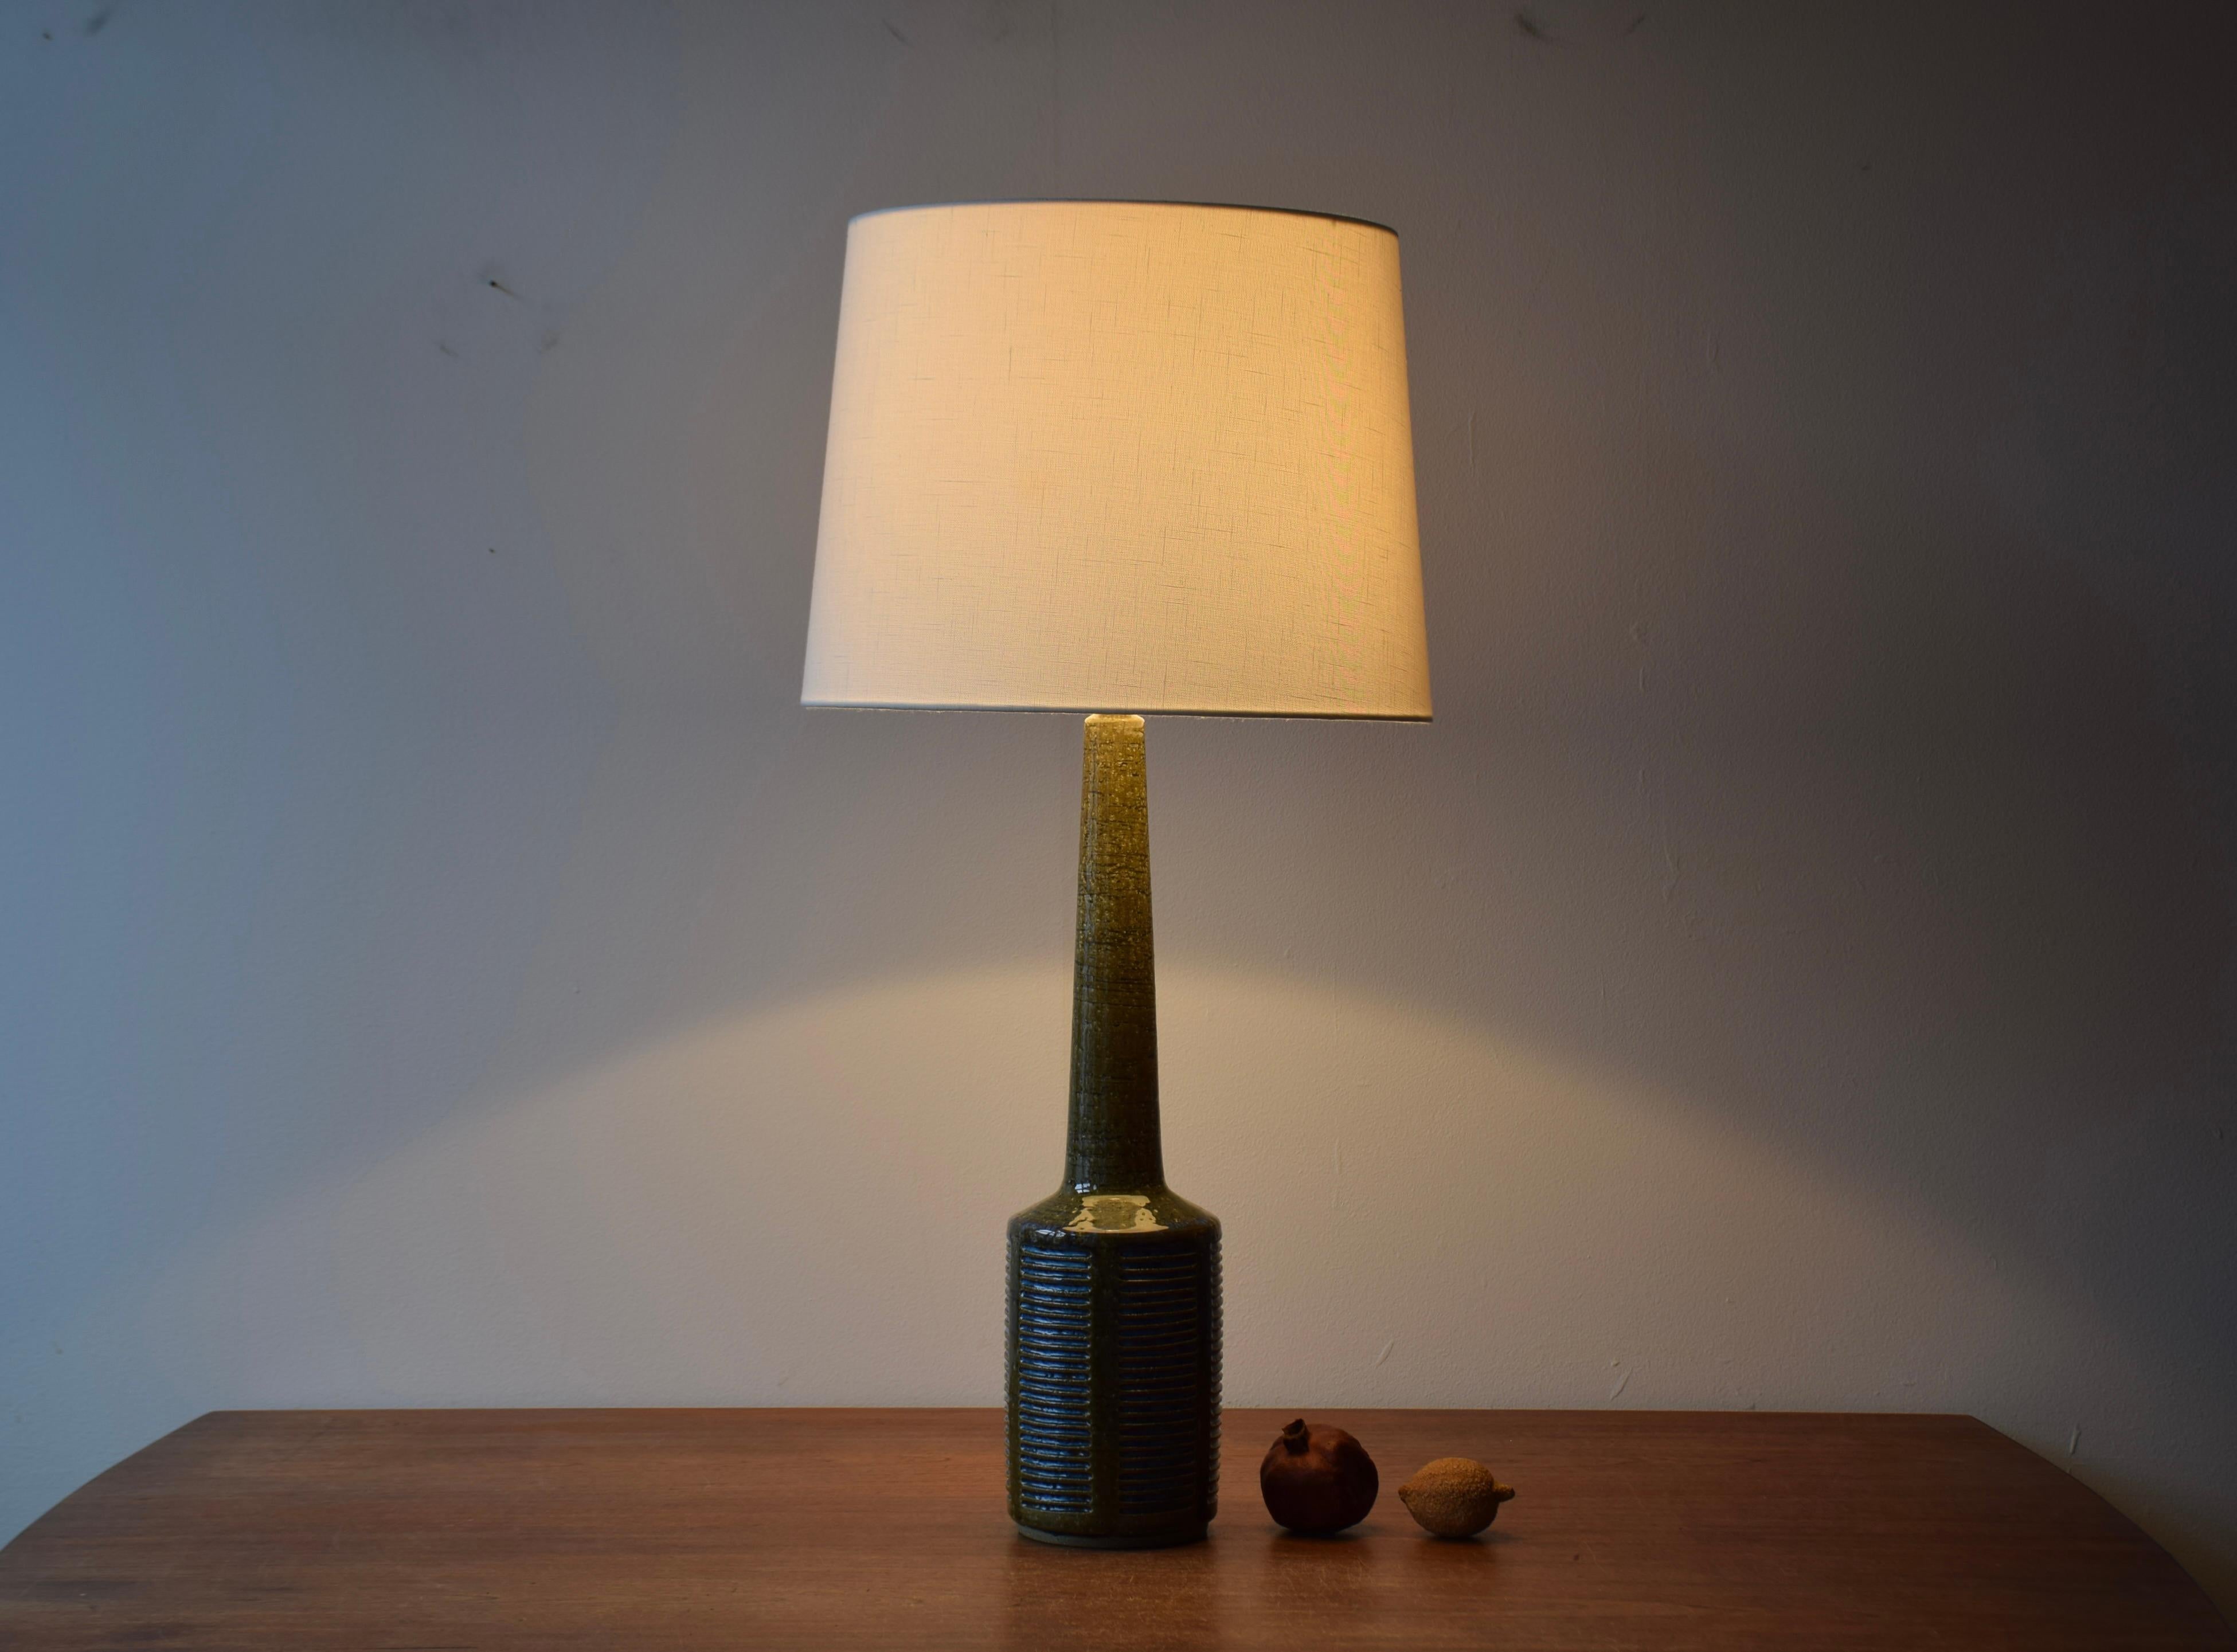 Very tall Mid-century Danish table lamp from the ceramic workshop Palshus.
The lamp was designed by Per Linnemann-Schmidt and manufactured circa 1960s.

The lamp is made with chamotte clay which gives a rough and vivid surface. The glaze is moss